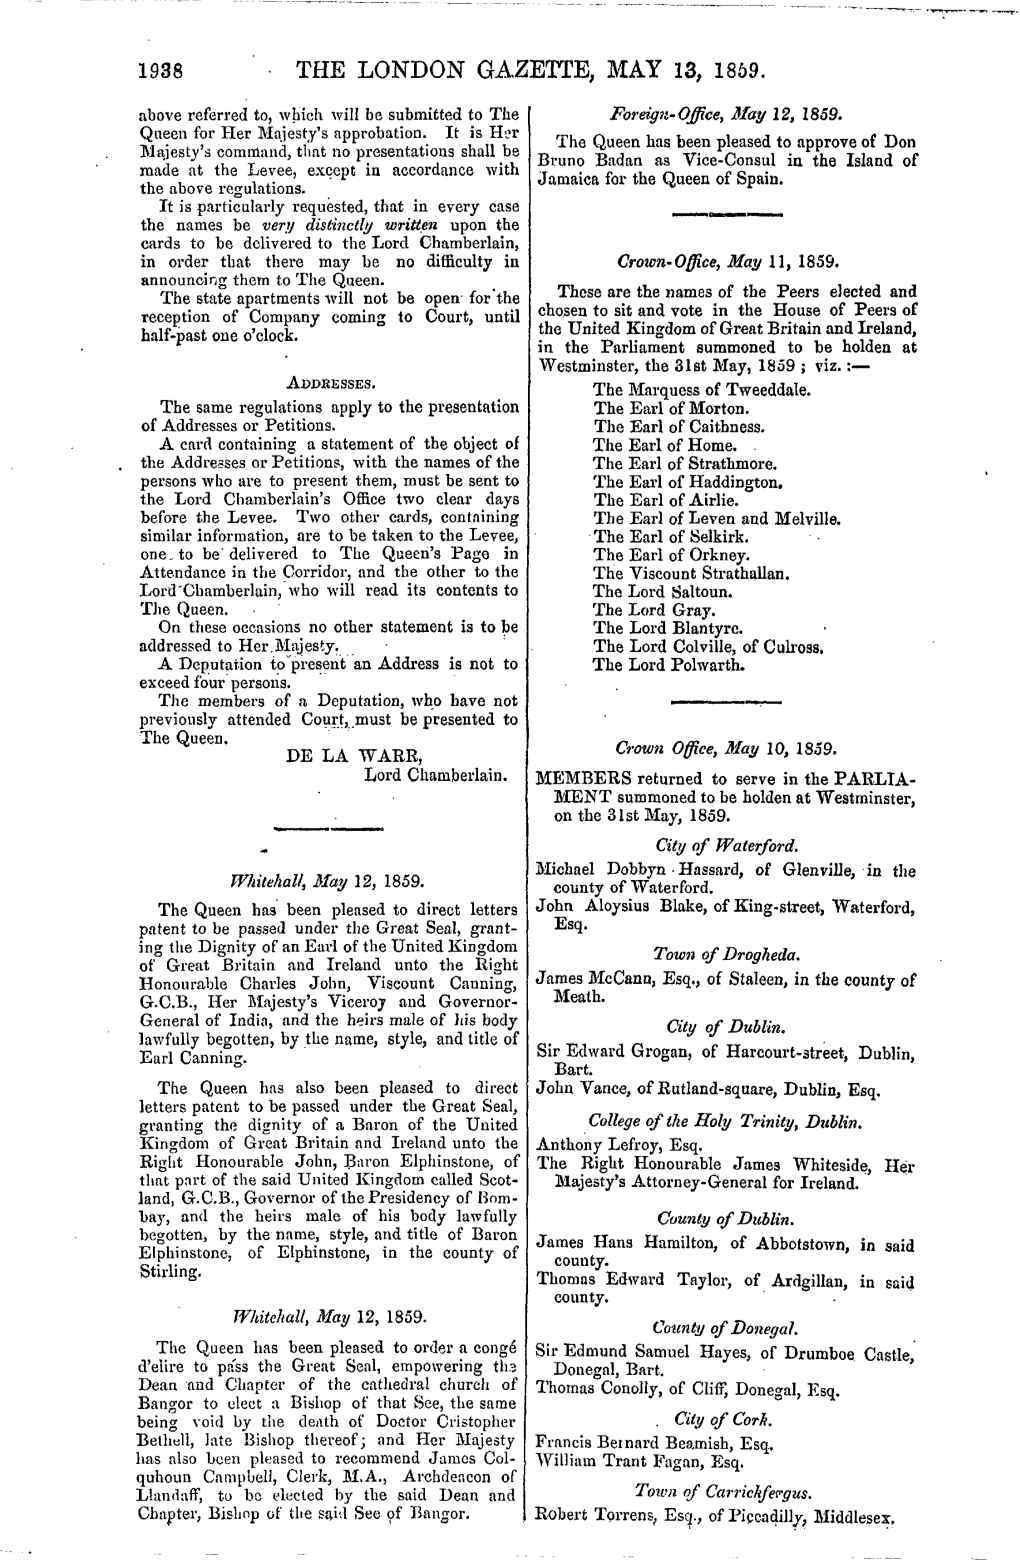 THE LONDON GAZETTE, MAY 13, 1859. Above Referred To, Which Will Be Submitted to the Foreign-Office, May 12, 1859